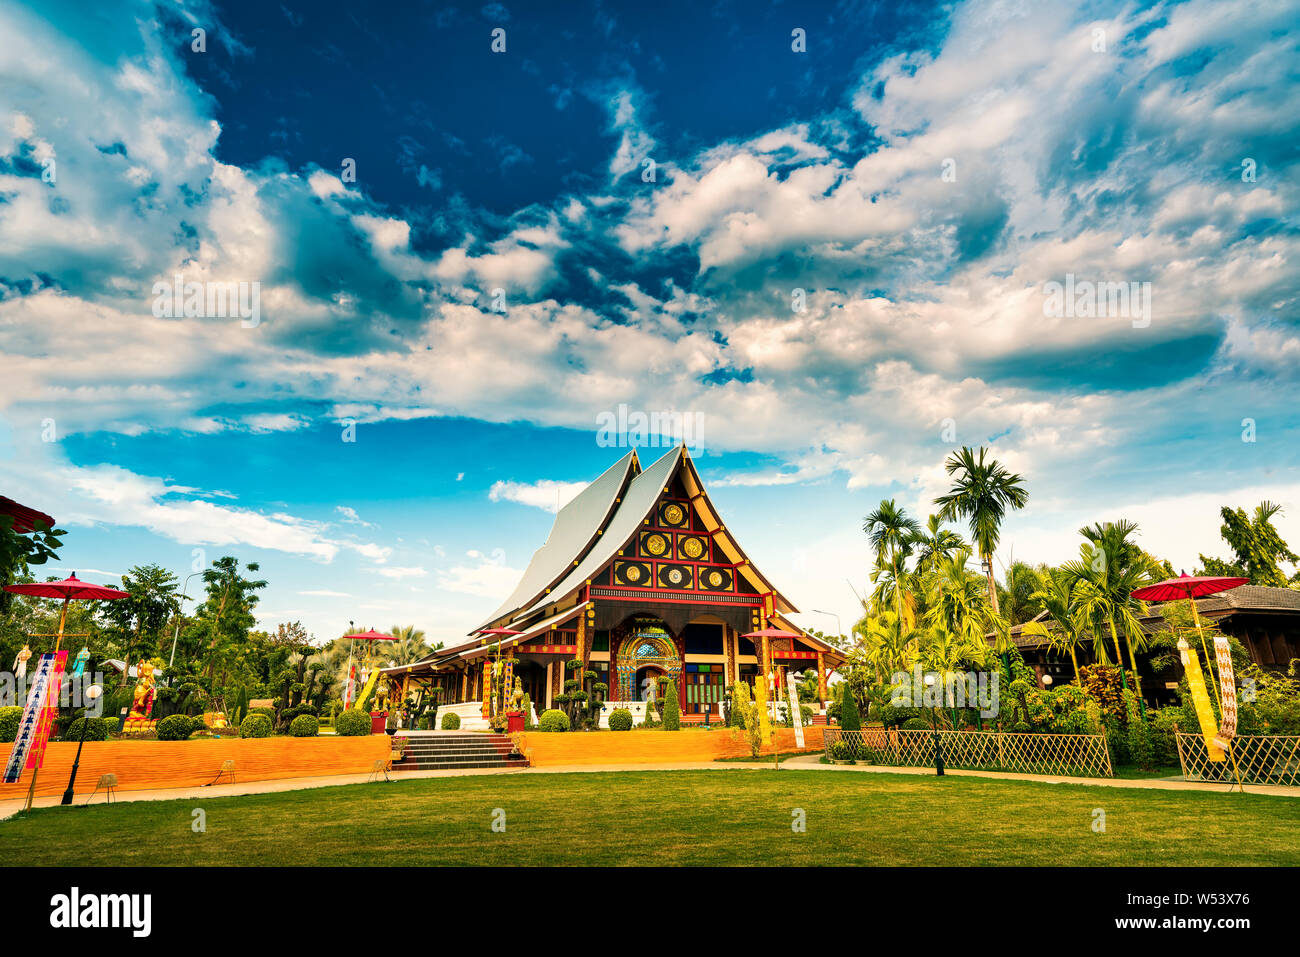 Amazing Thailand Temple in Traditional Thai architecture on background scenery nature landscape at sunset. Asia, Thailand Stock Photo